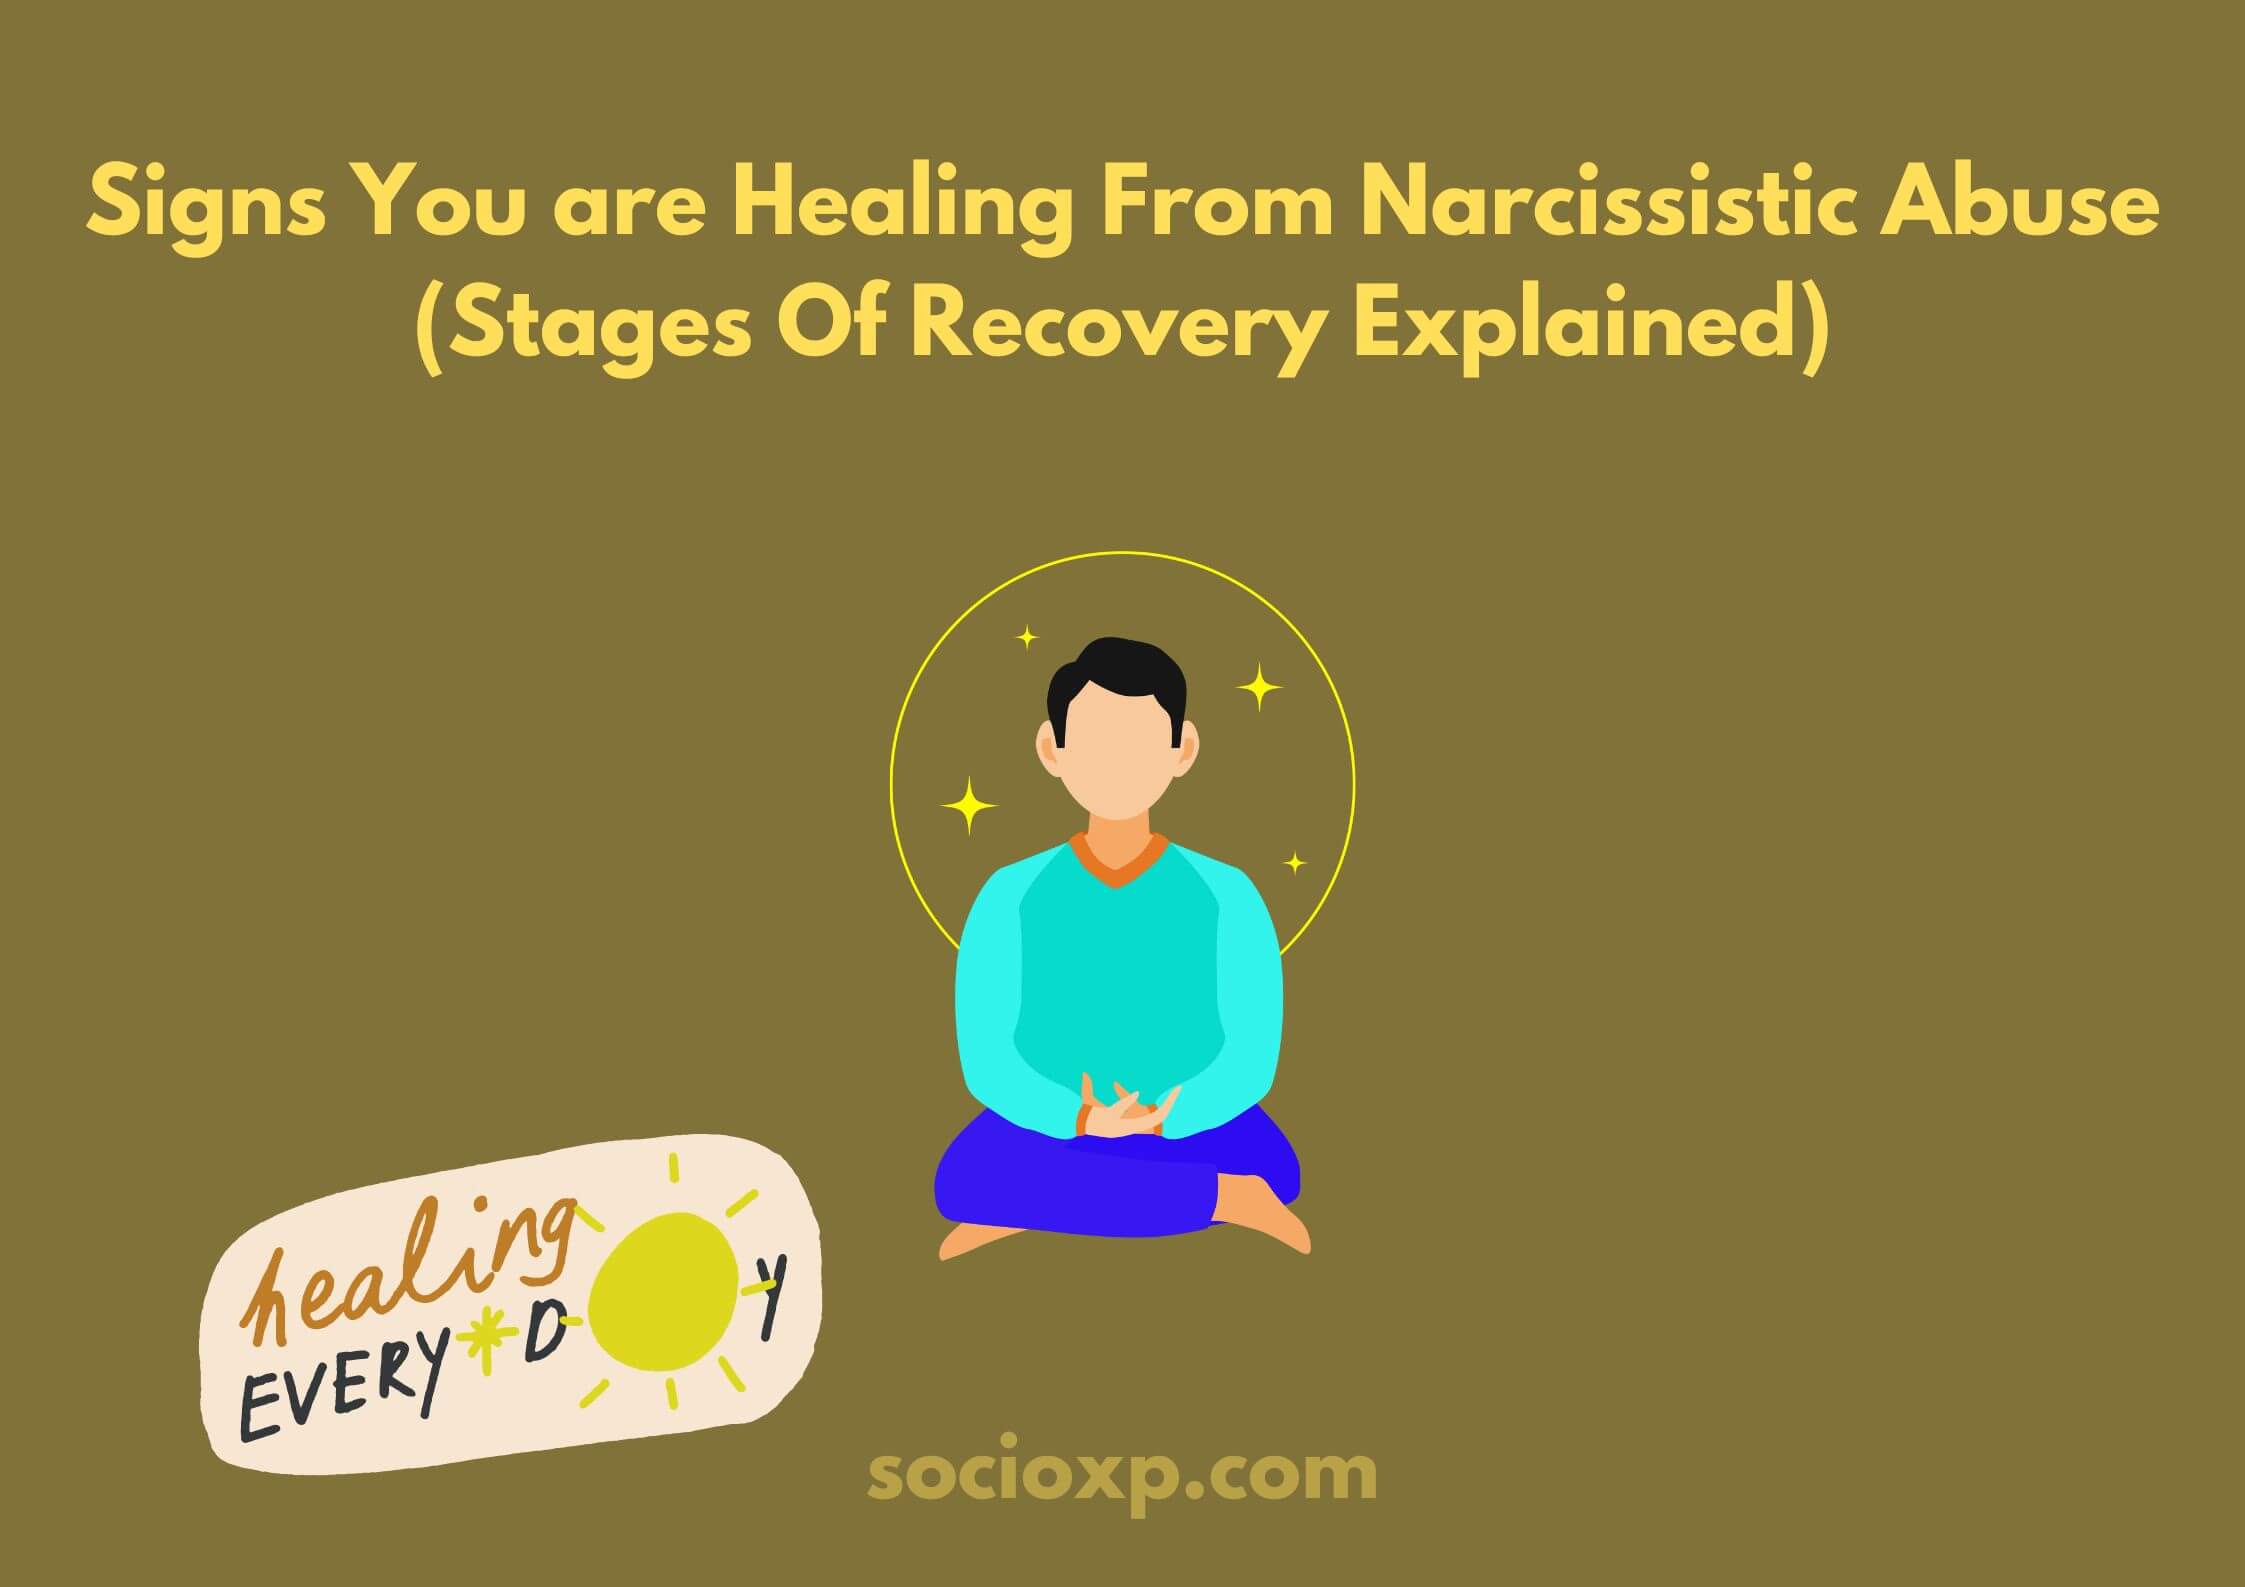 Signs You are Healing From Narcissistic Abuse (Stages Of Recovery Explained)